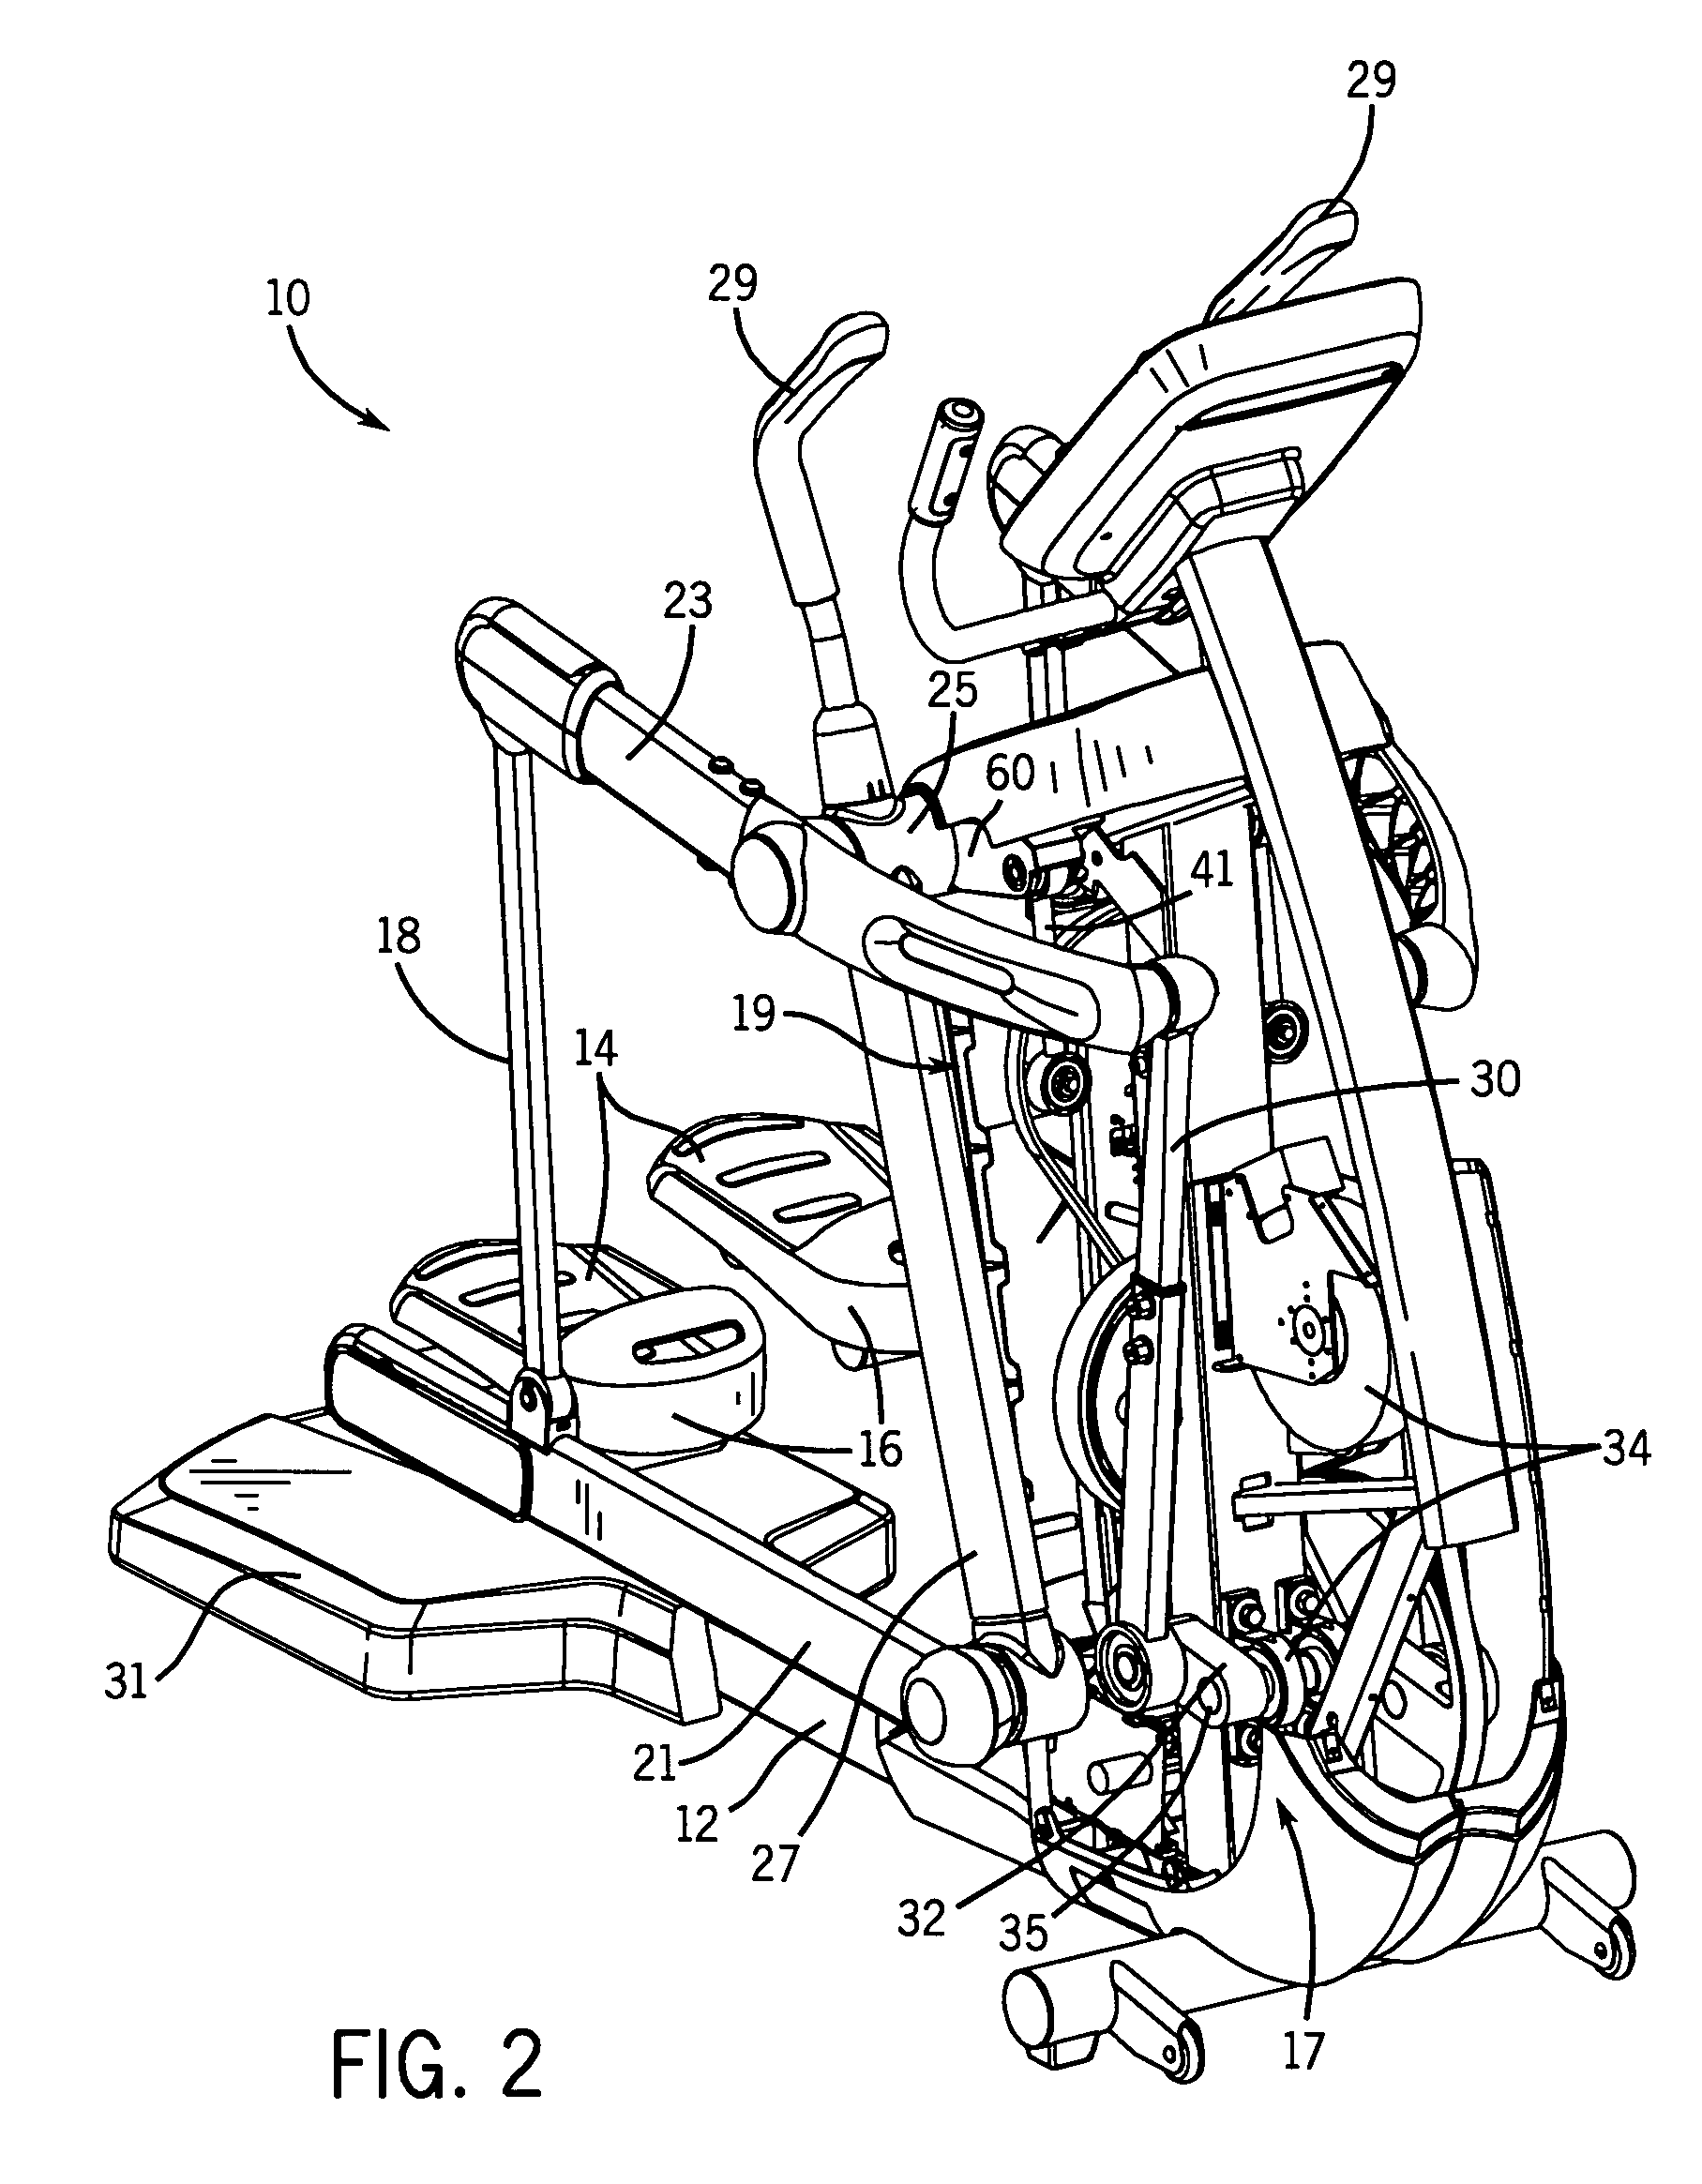 Supplemental resistance assembly for resisting motion of an exercise device